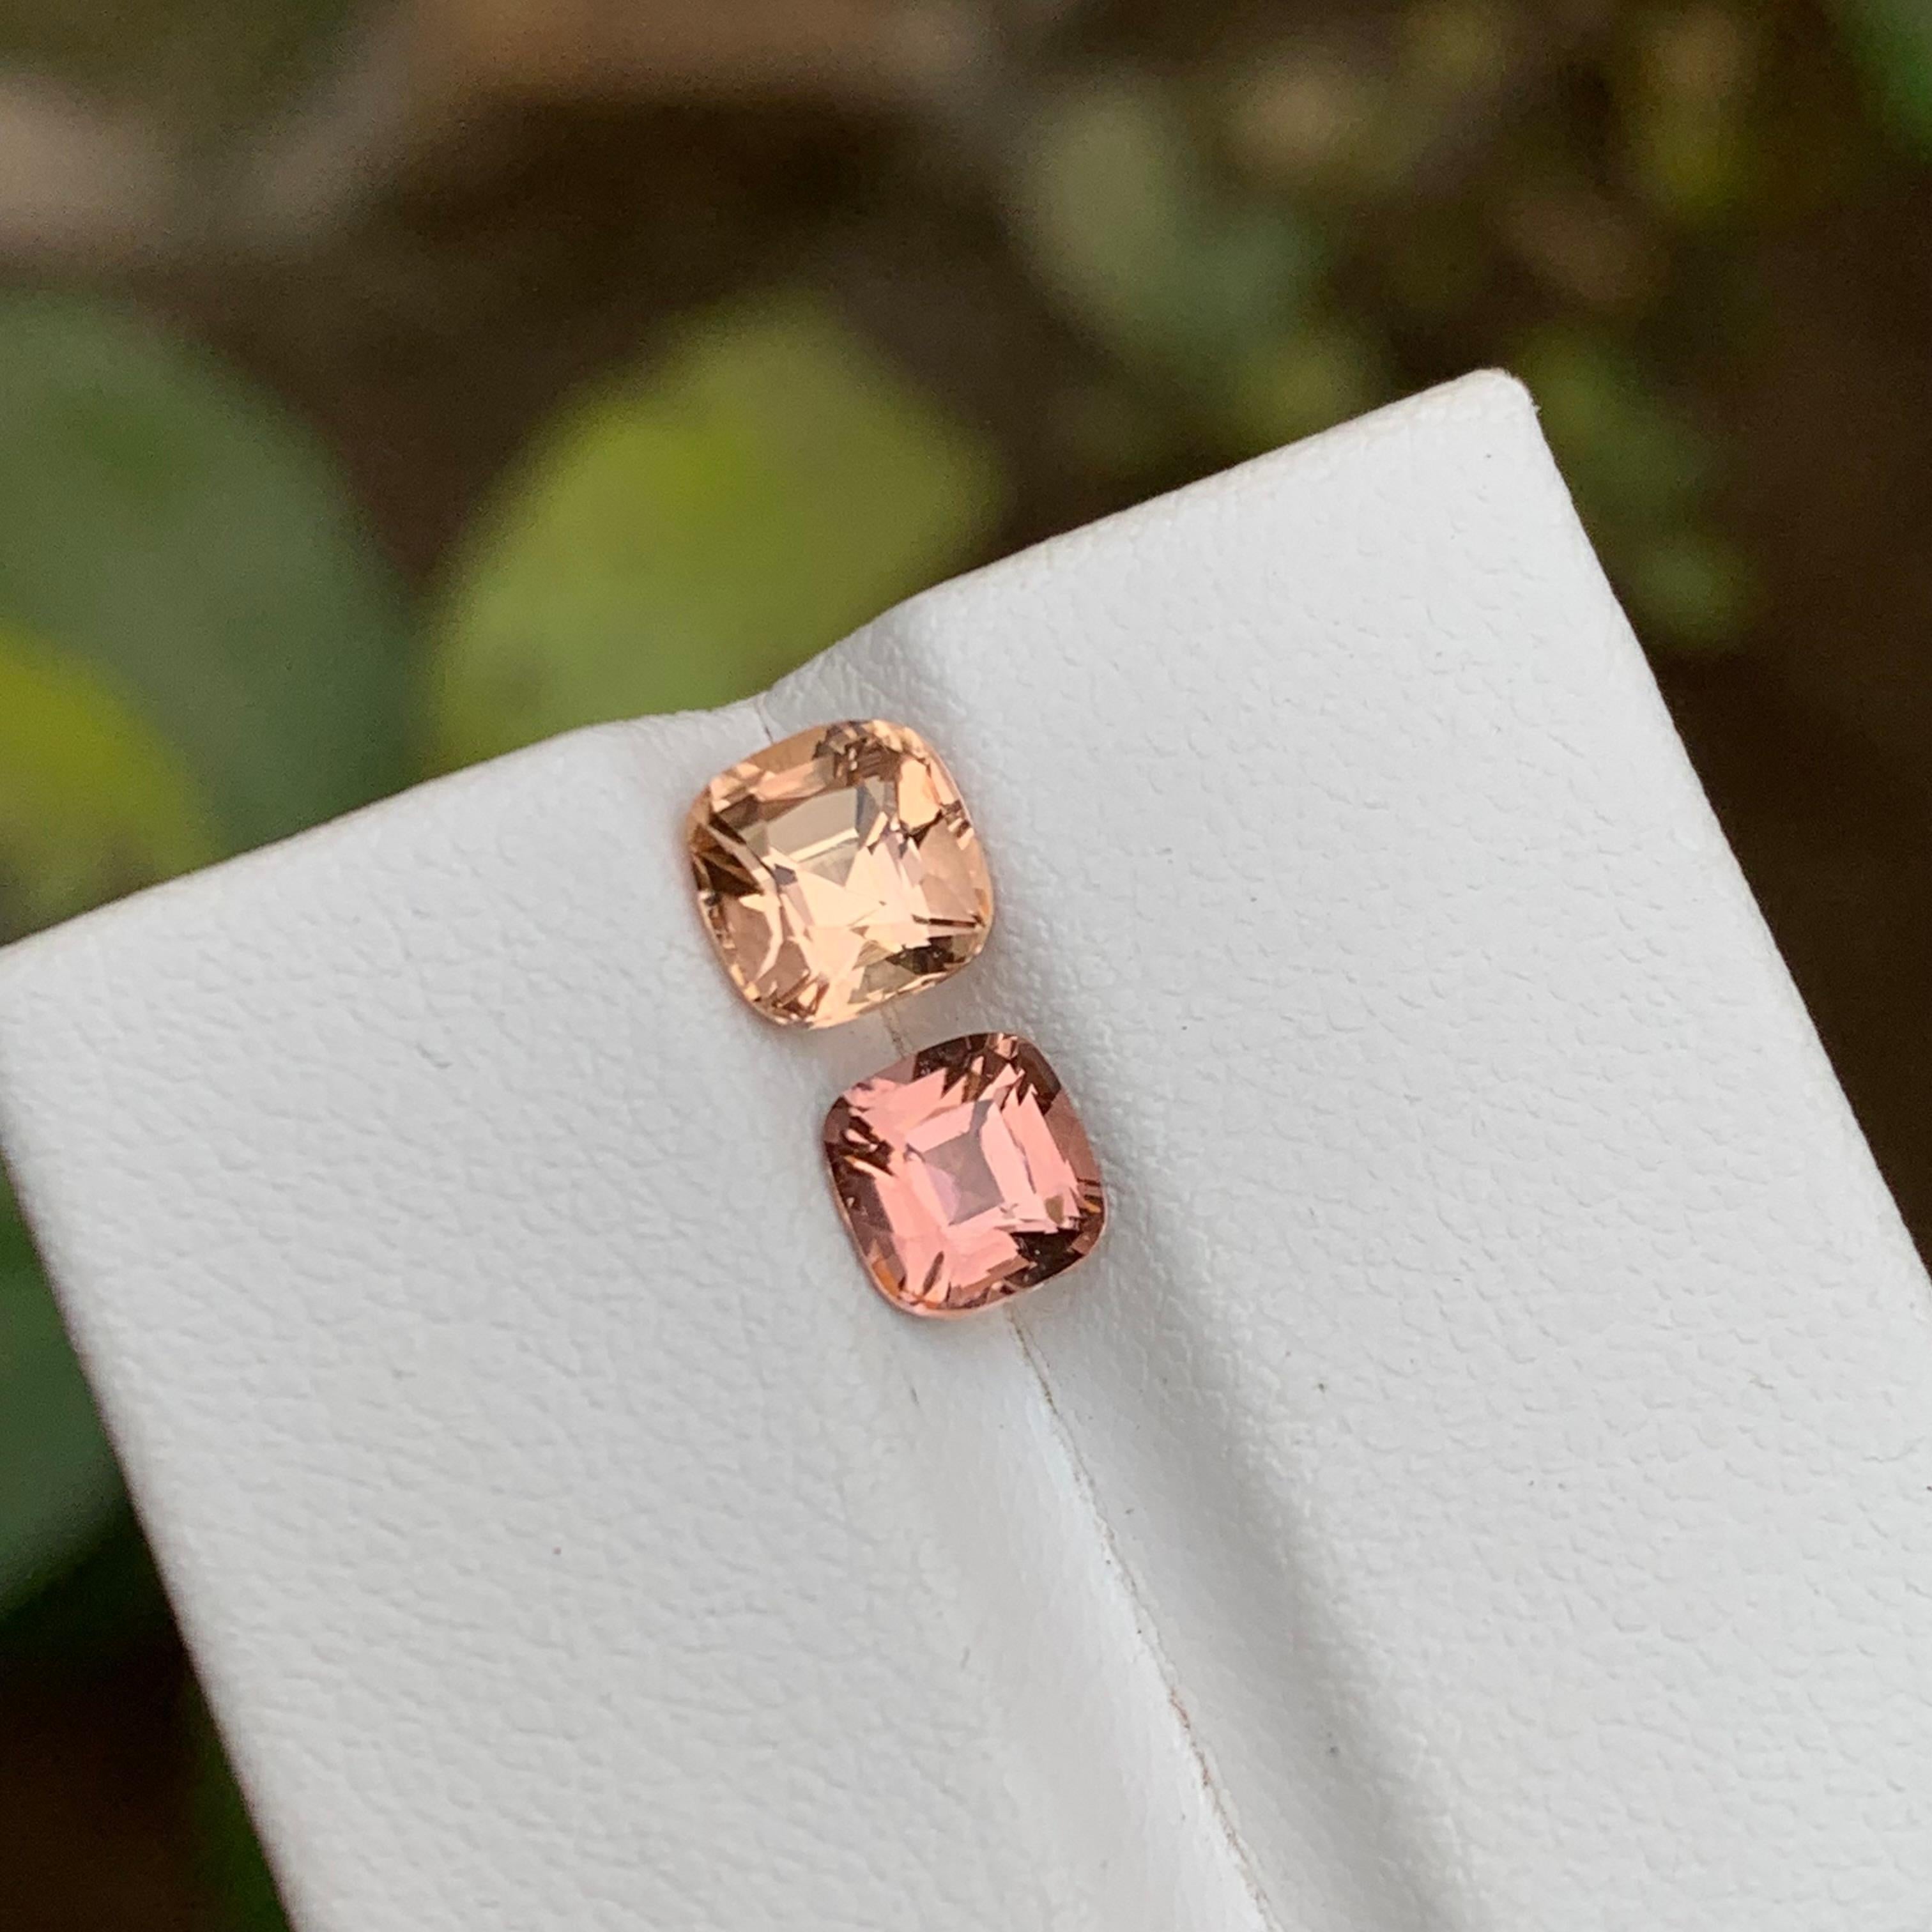 GEMSTONE TYPE: Tourmaline
PIECE(S): 2
WEIGHT: 2.05 Carats
SHAPE: Cushion
SIZE (MM):  1.25 Carat: 6.07 x 5.94 x 5.25
and 0.80 Carat: 5.56 x 5.32 x 3.88
COLOR: Golden Peach and Pink
CLARITY: Eye Clean
TREATMENT: Heated
ORIGIN: Afghanistan
CERTIFICATE: